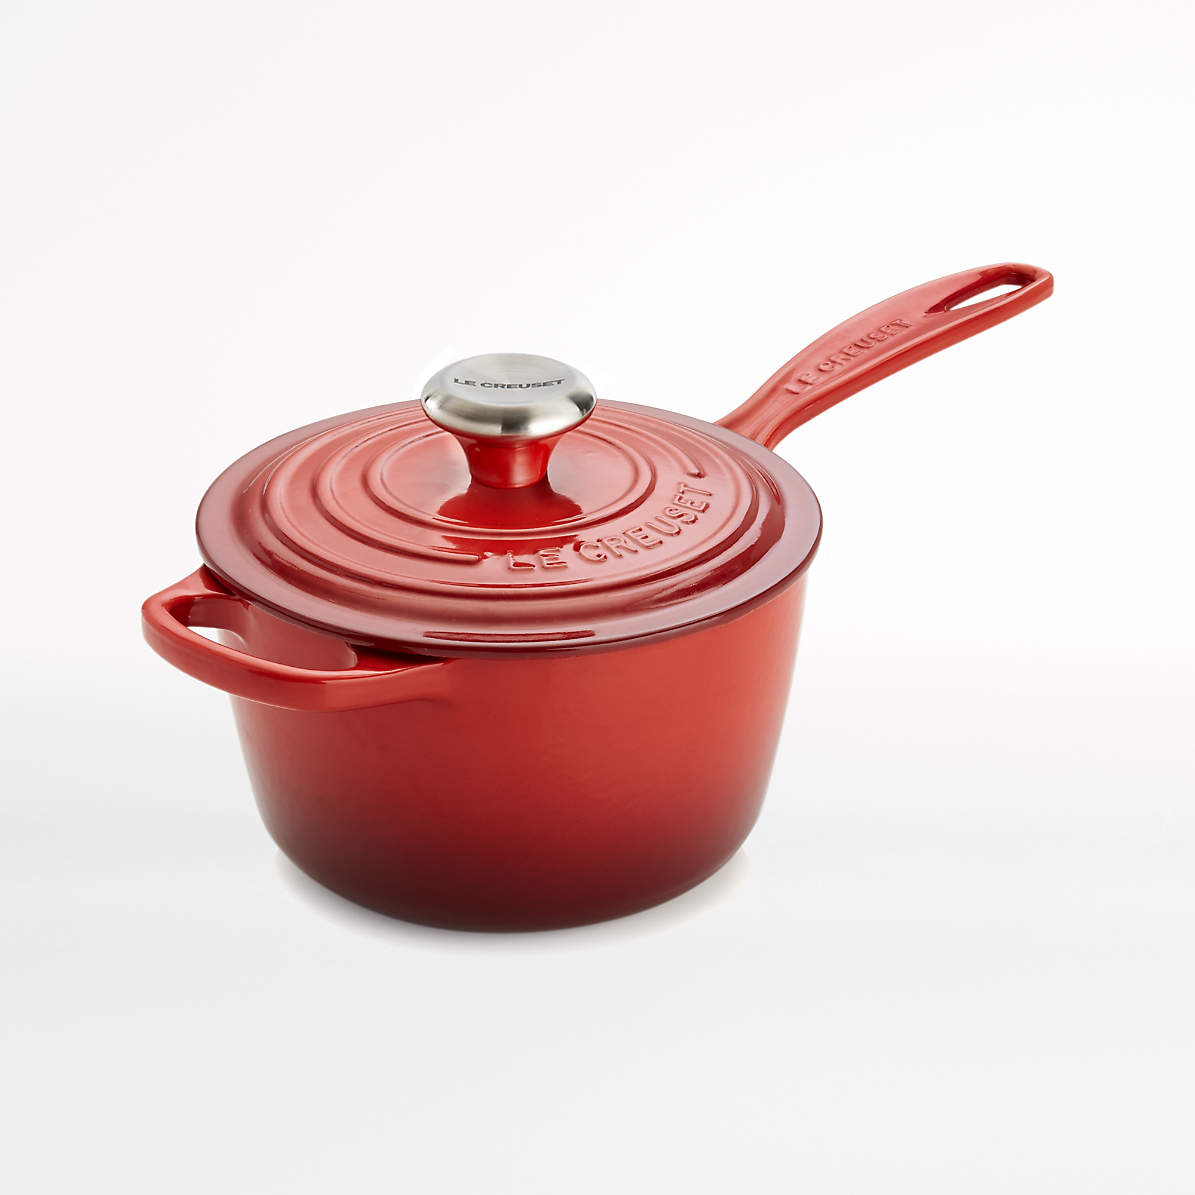 RED ENAMELED CAST IRON SAUCE PAN